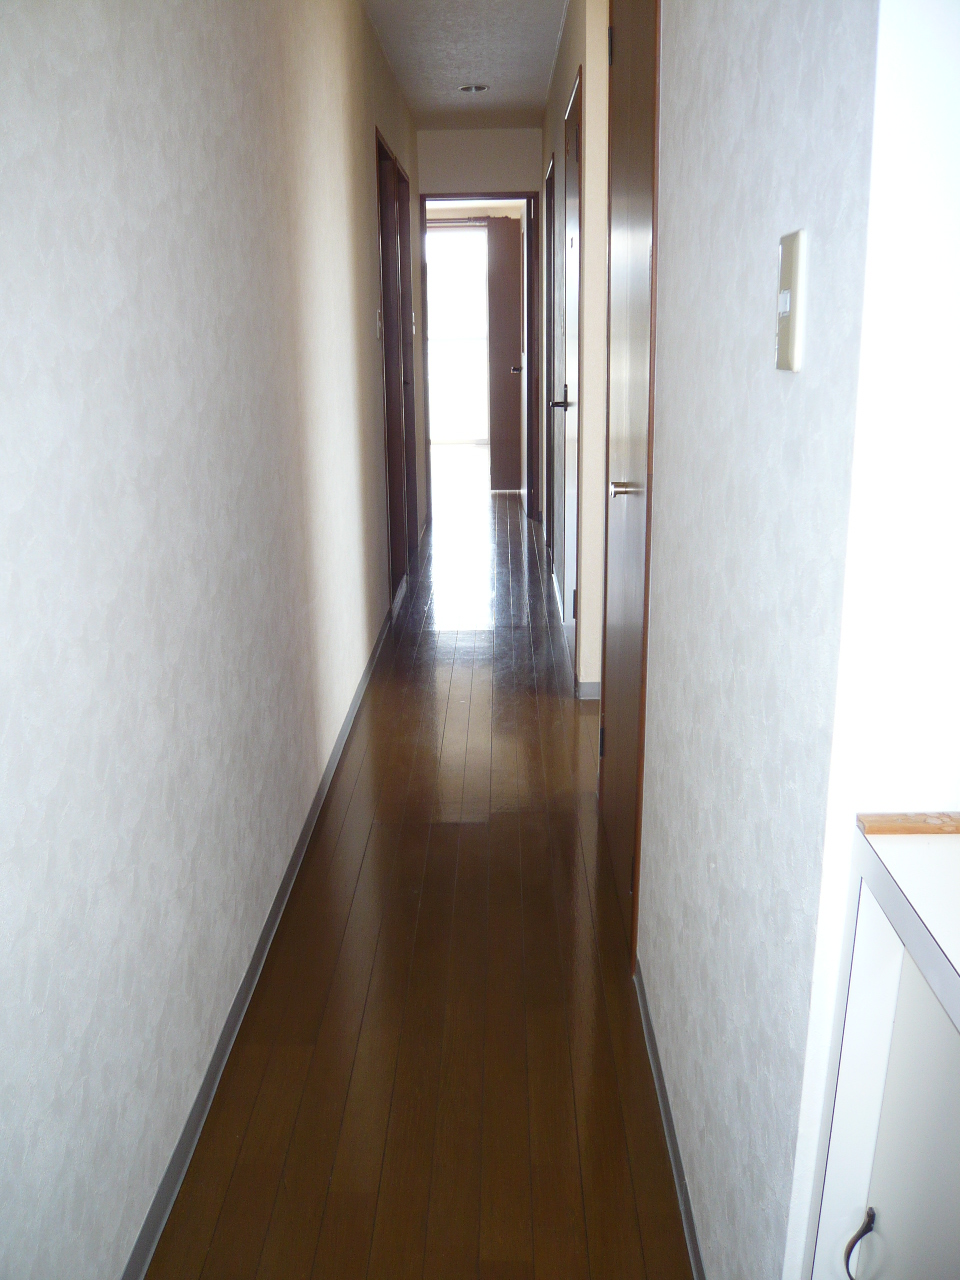 Other room space. Corridor leading from the entrance to the living room